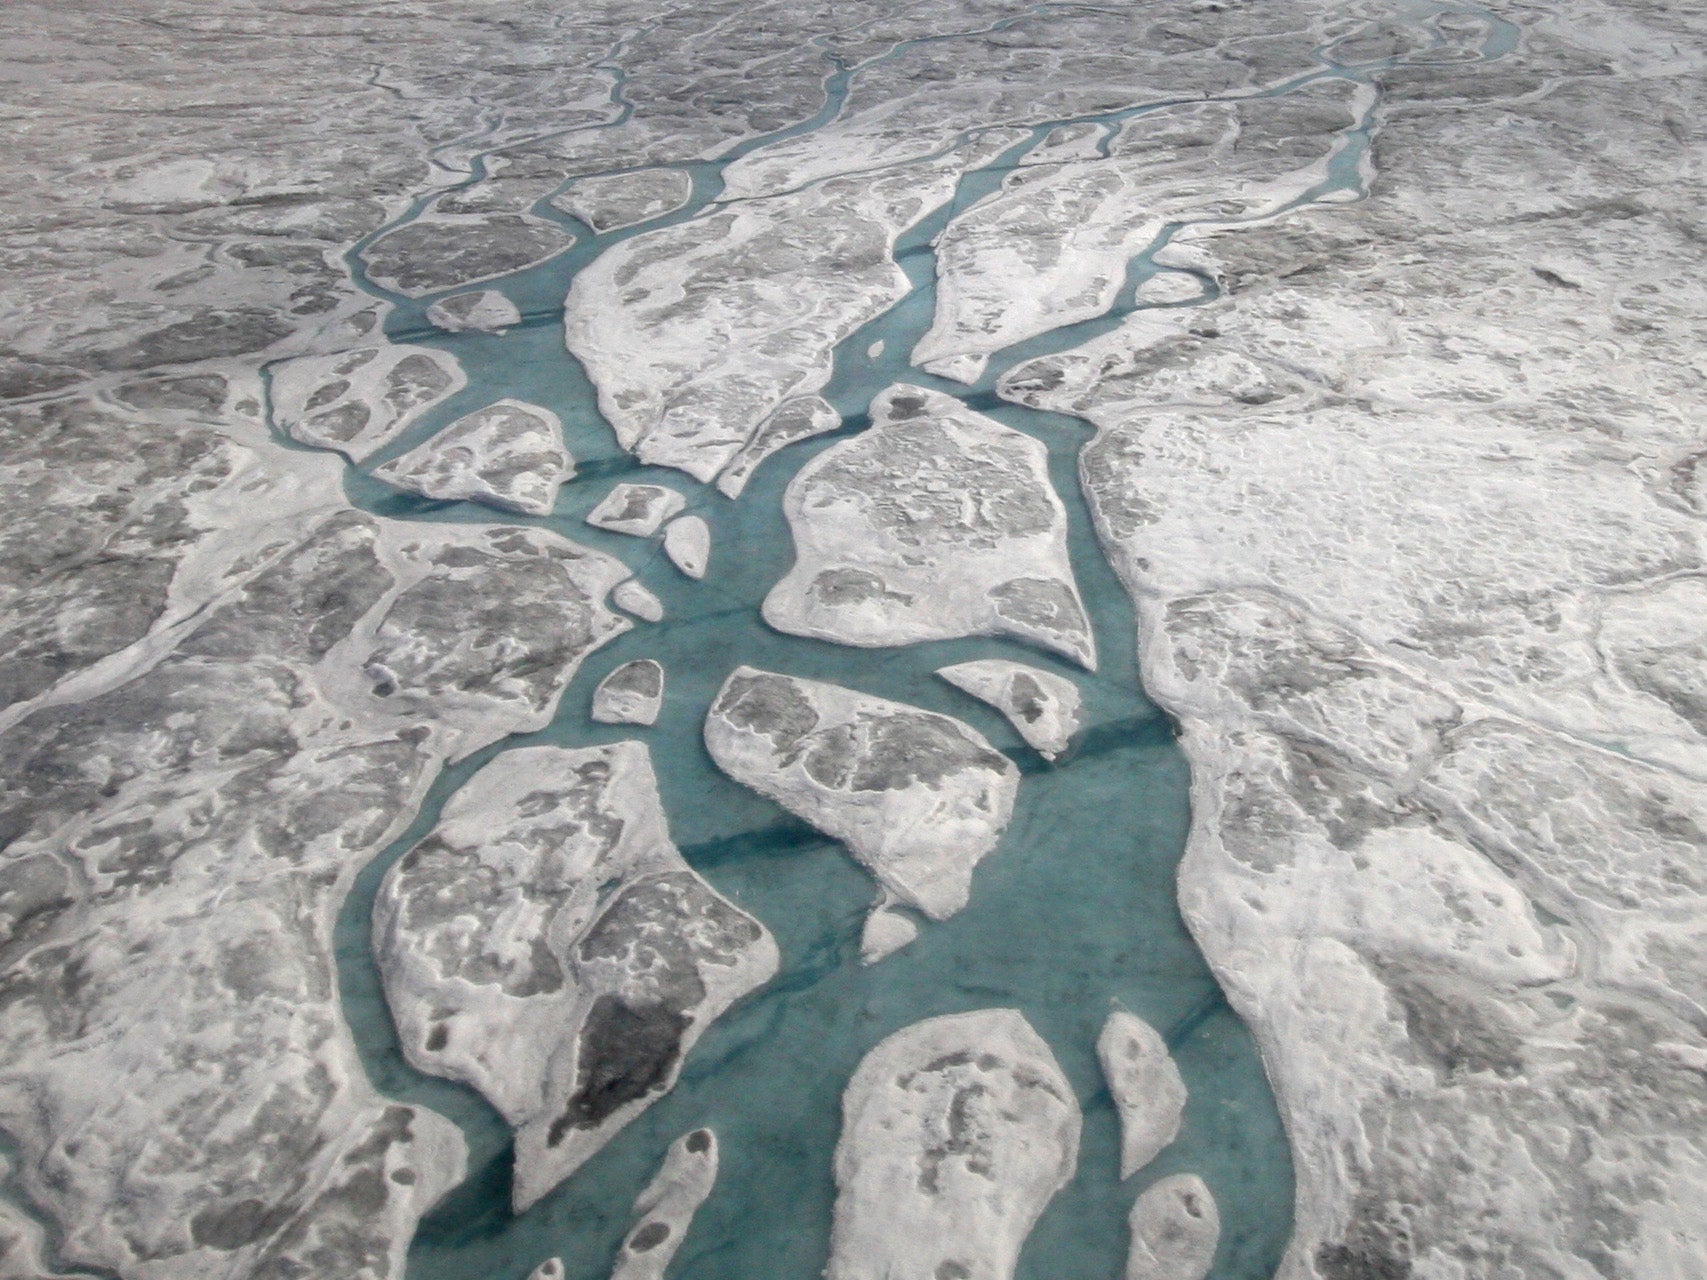 Surface meltwater in Greenland